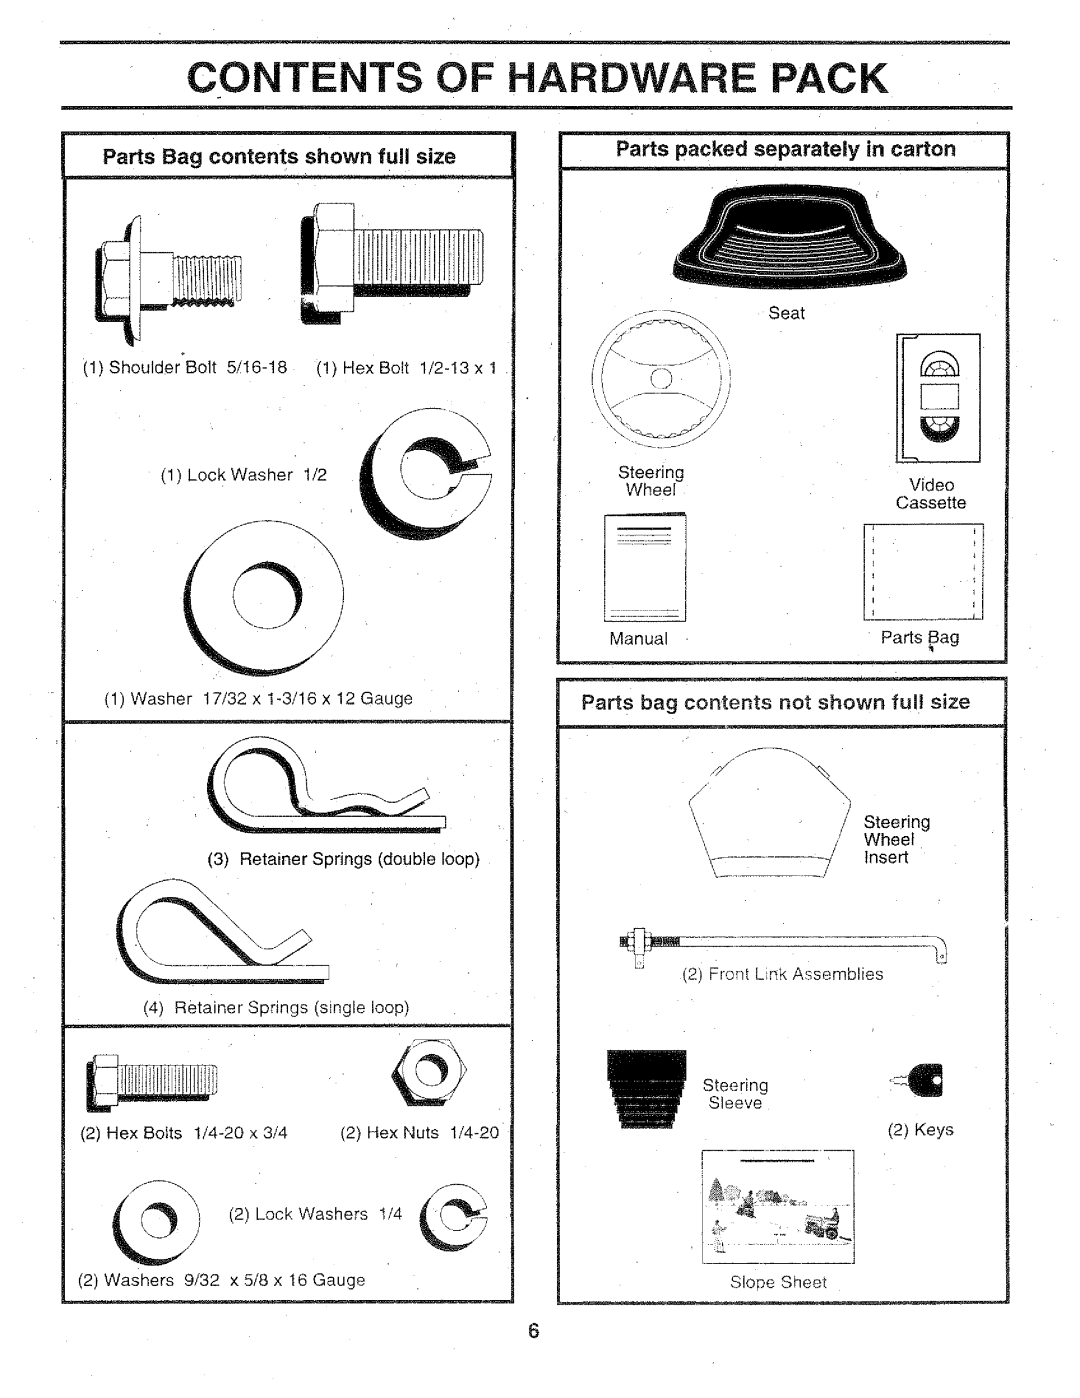 Sears 917.25147 Contents Of Hardware Pack, Parts Bag contents shown full size, Parts packed separately in carton 